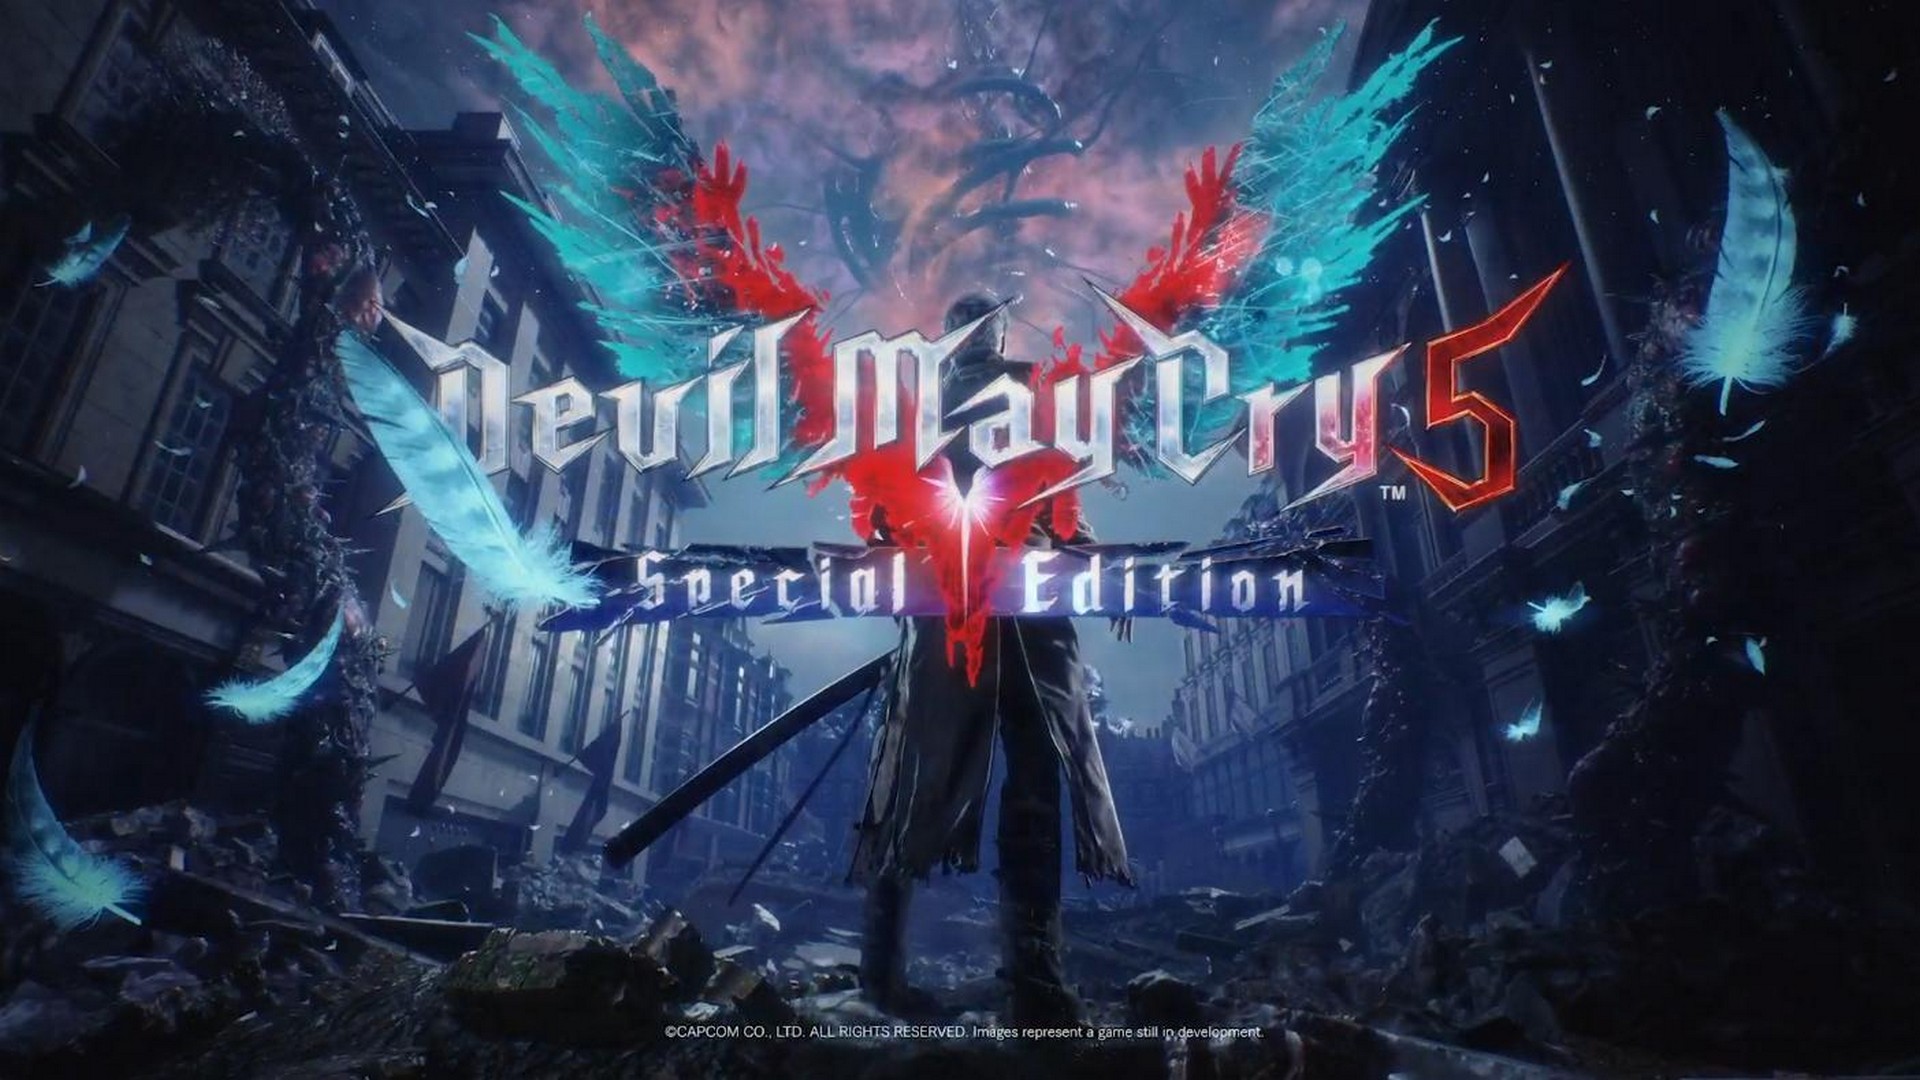 Devil May Cry 5 Special Edition Brings All New Features Playable Vergil To Next Gen Consoles Mkau Gaming